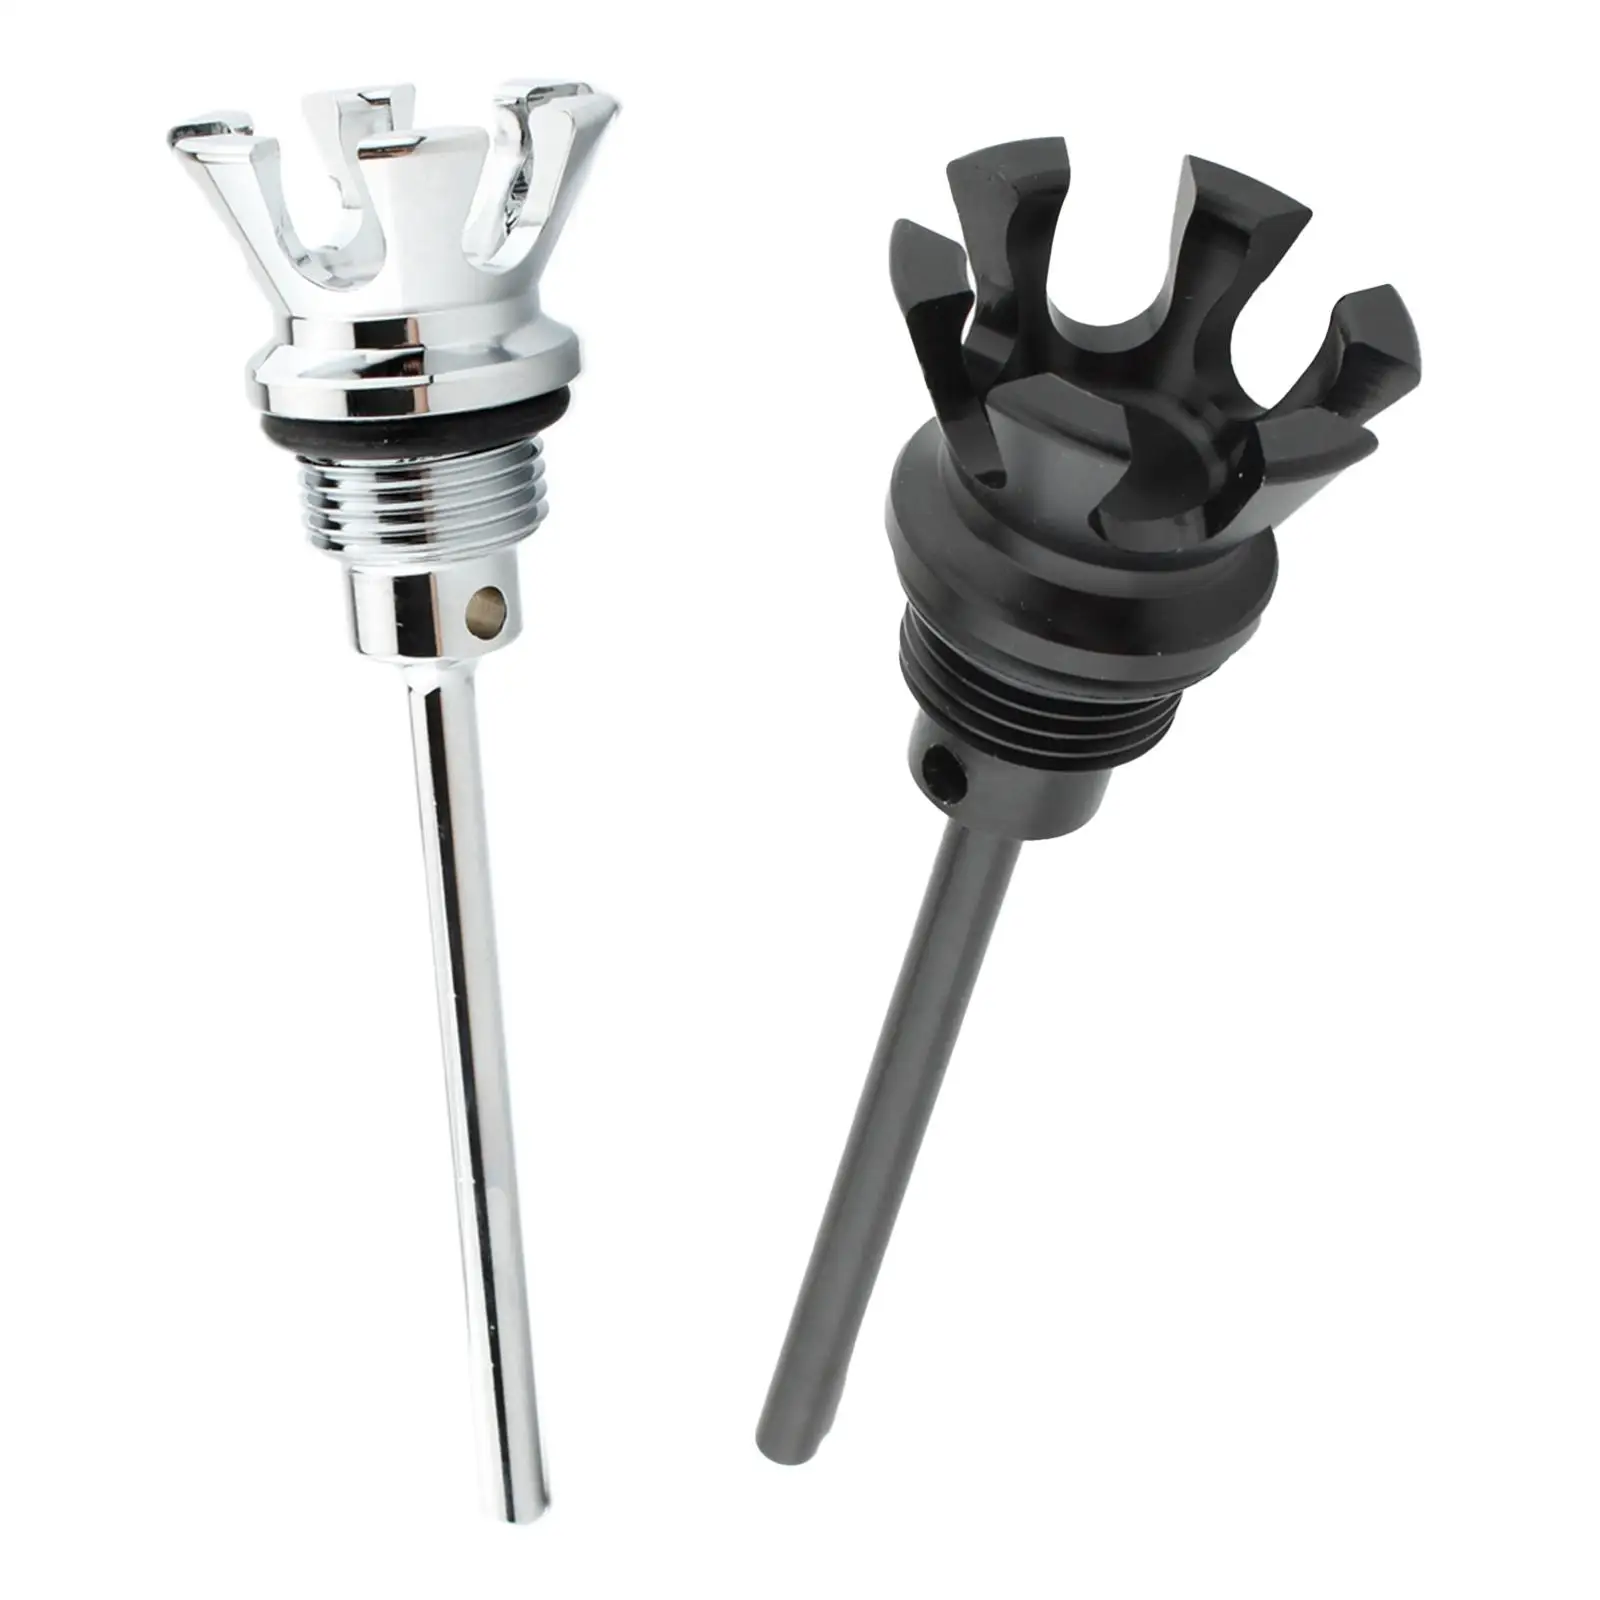 Aluminum Alloy Engine Oil Dipstick, Replaces Motorcycle Accessories